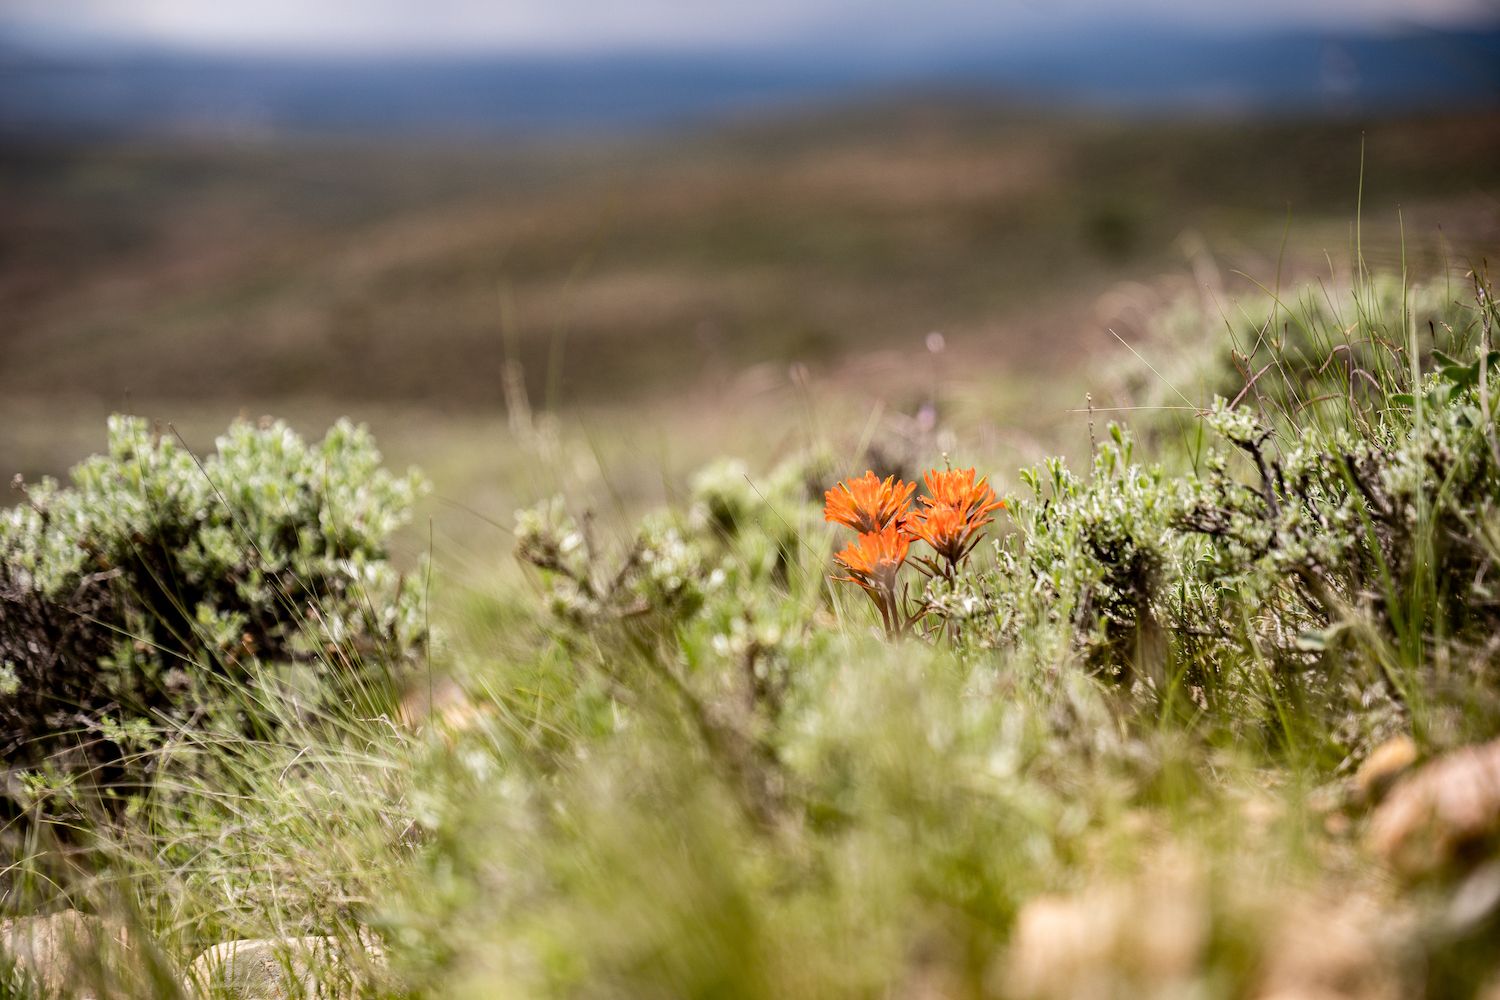 A group of three flowers in a field of sagebrush